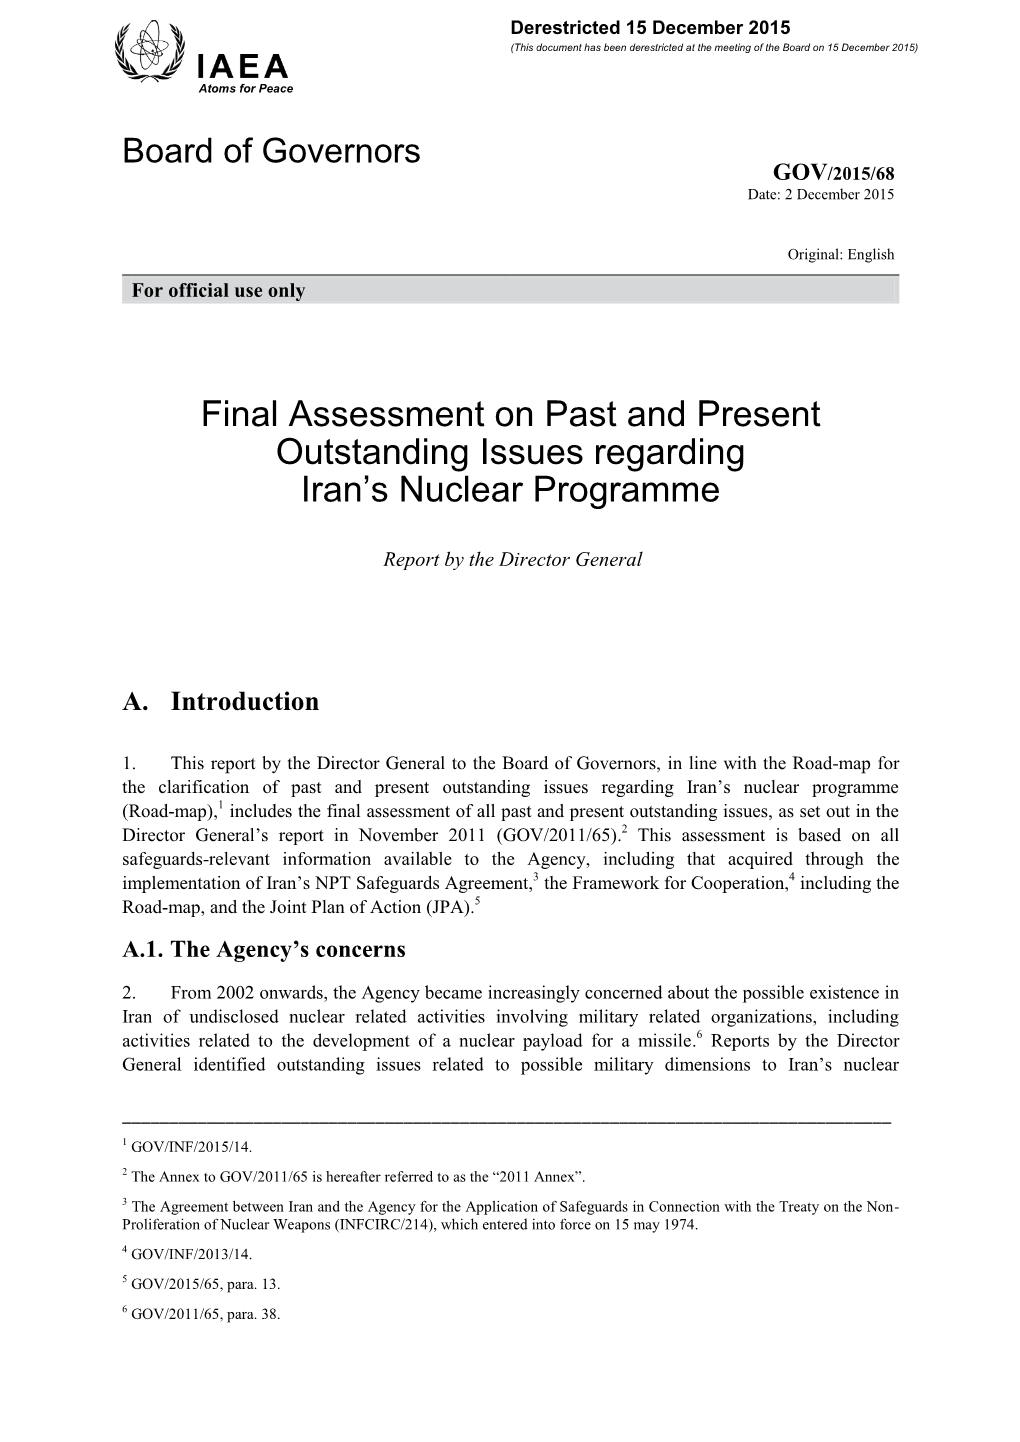 Final Assessment on Past and Present Outstanding Issues Regarding Iran’S Nuclear Programme